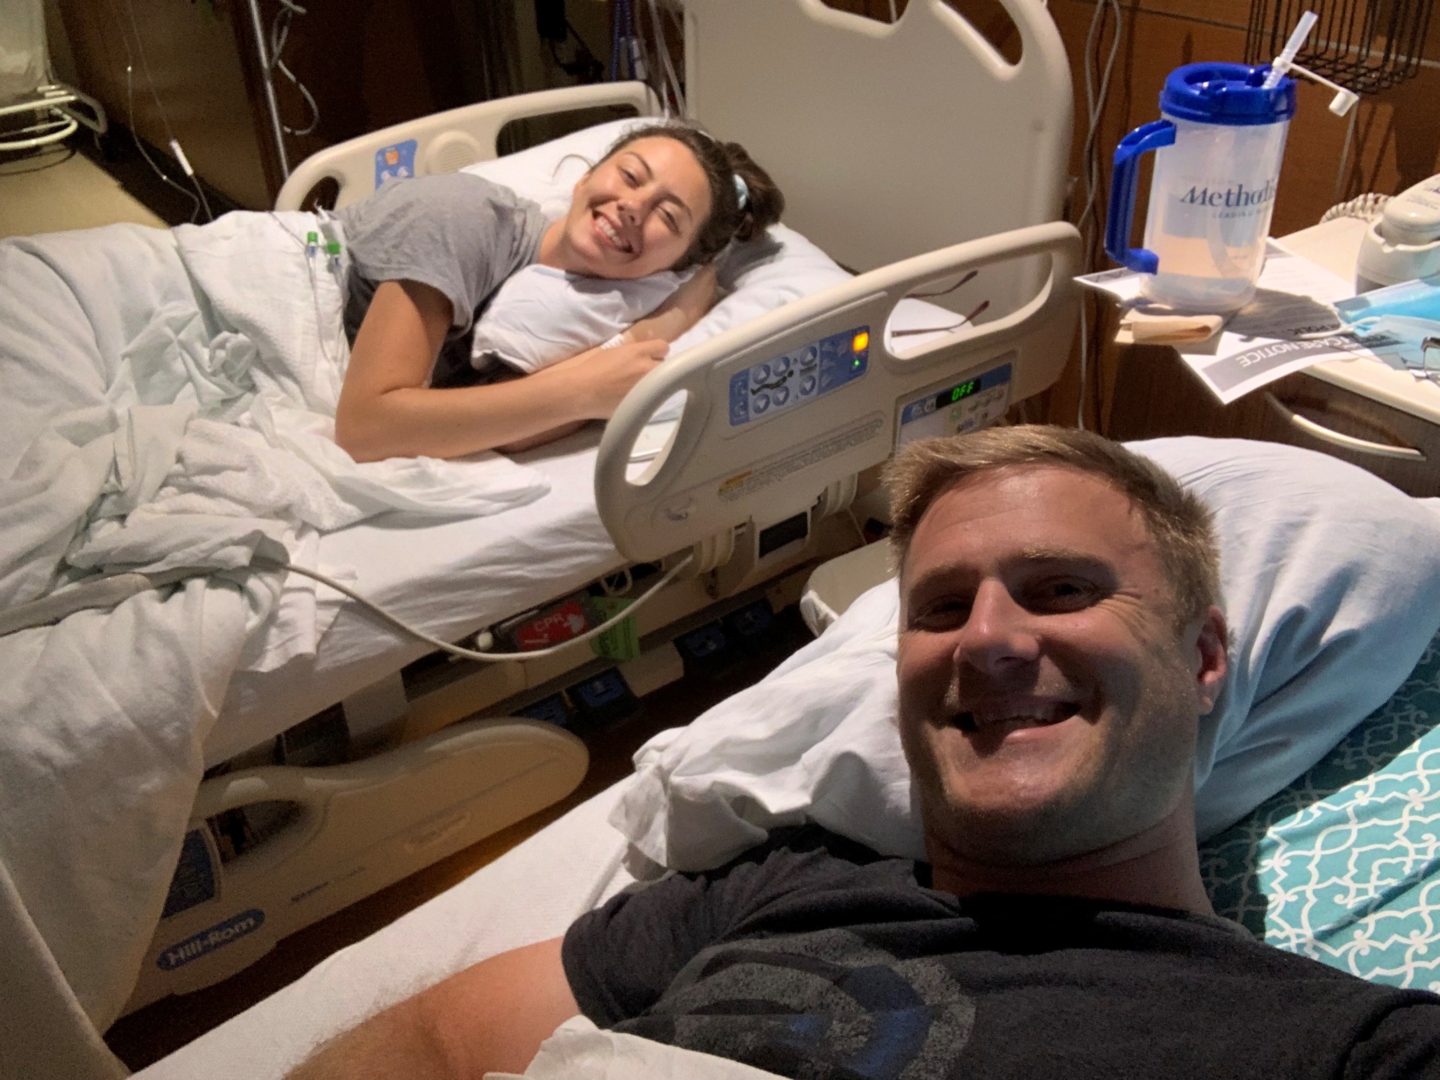  Brian and Molly Gerwig have decided to carry a positive mindset and view everything as a blessing as Molly currently fights stage IV Neuroendocrine Colon cancer. | Courtesy of Brian and Molly Gerwig